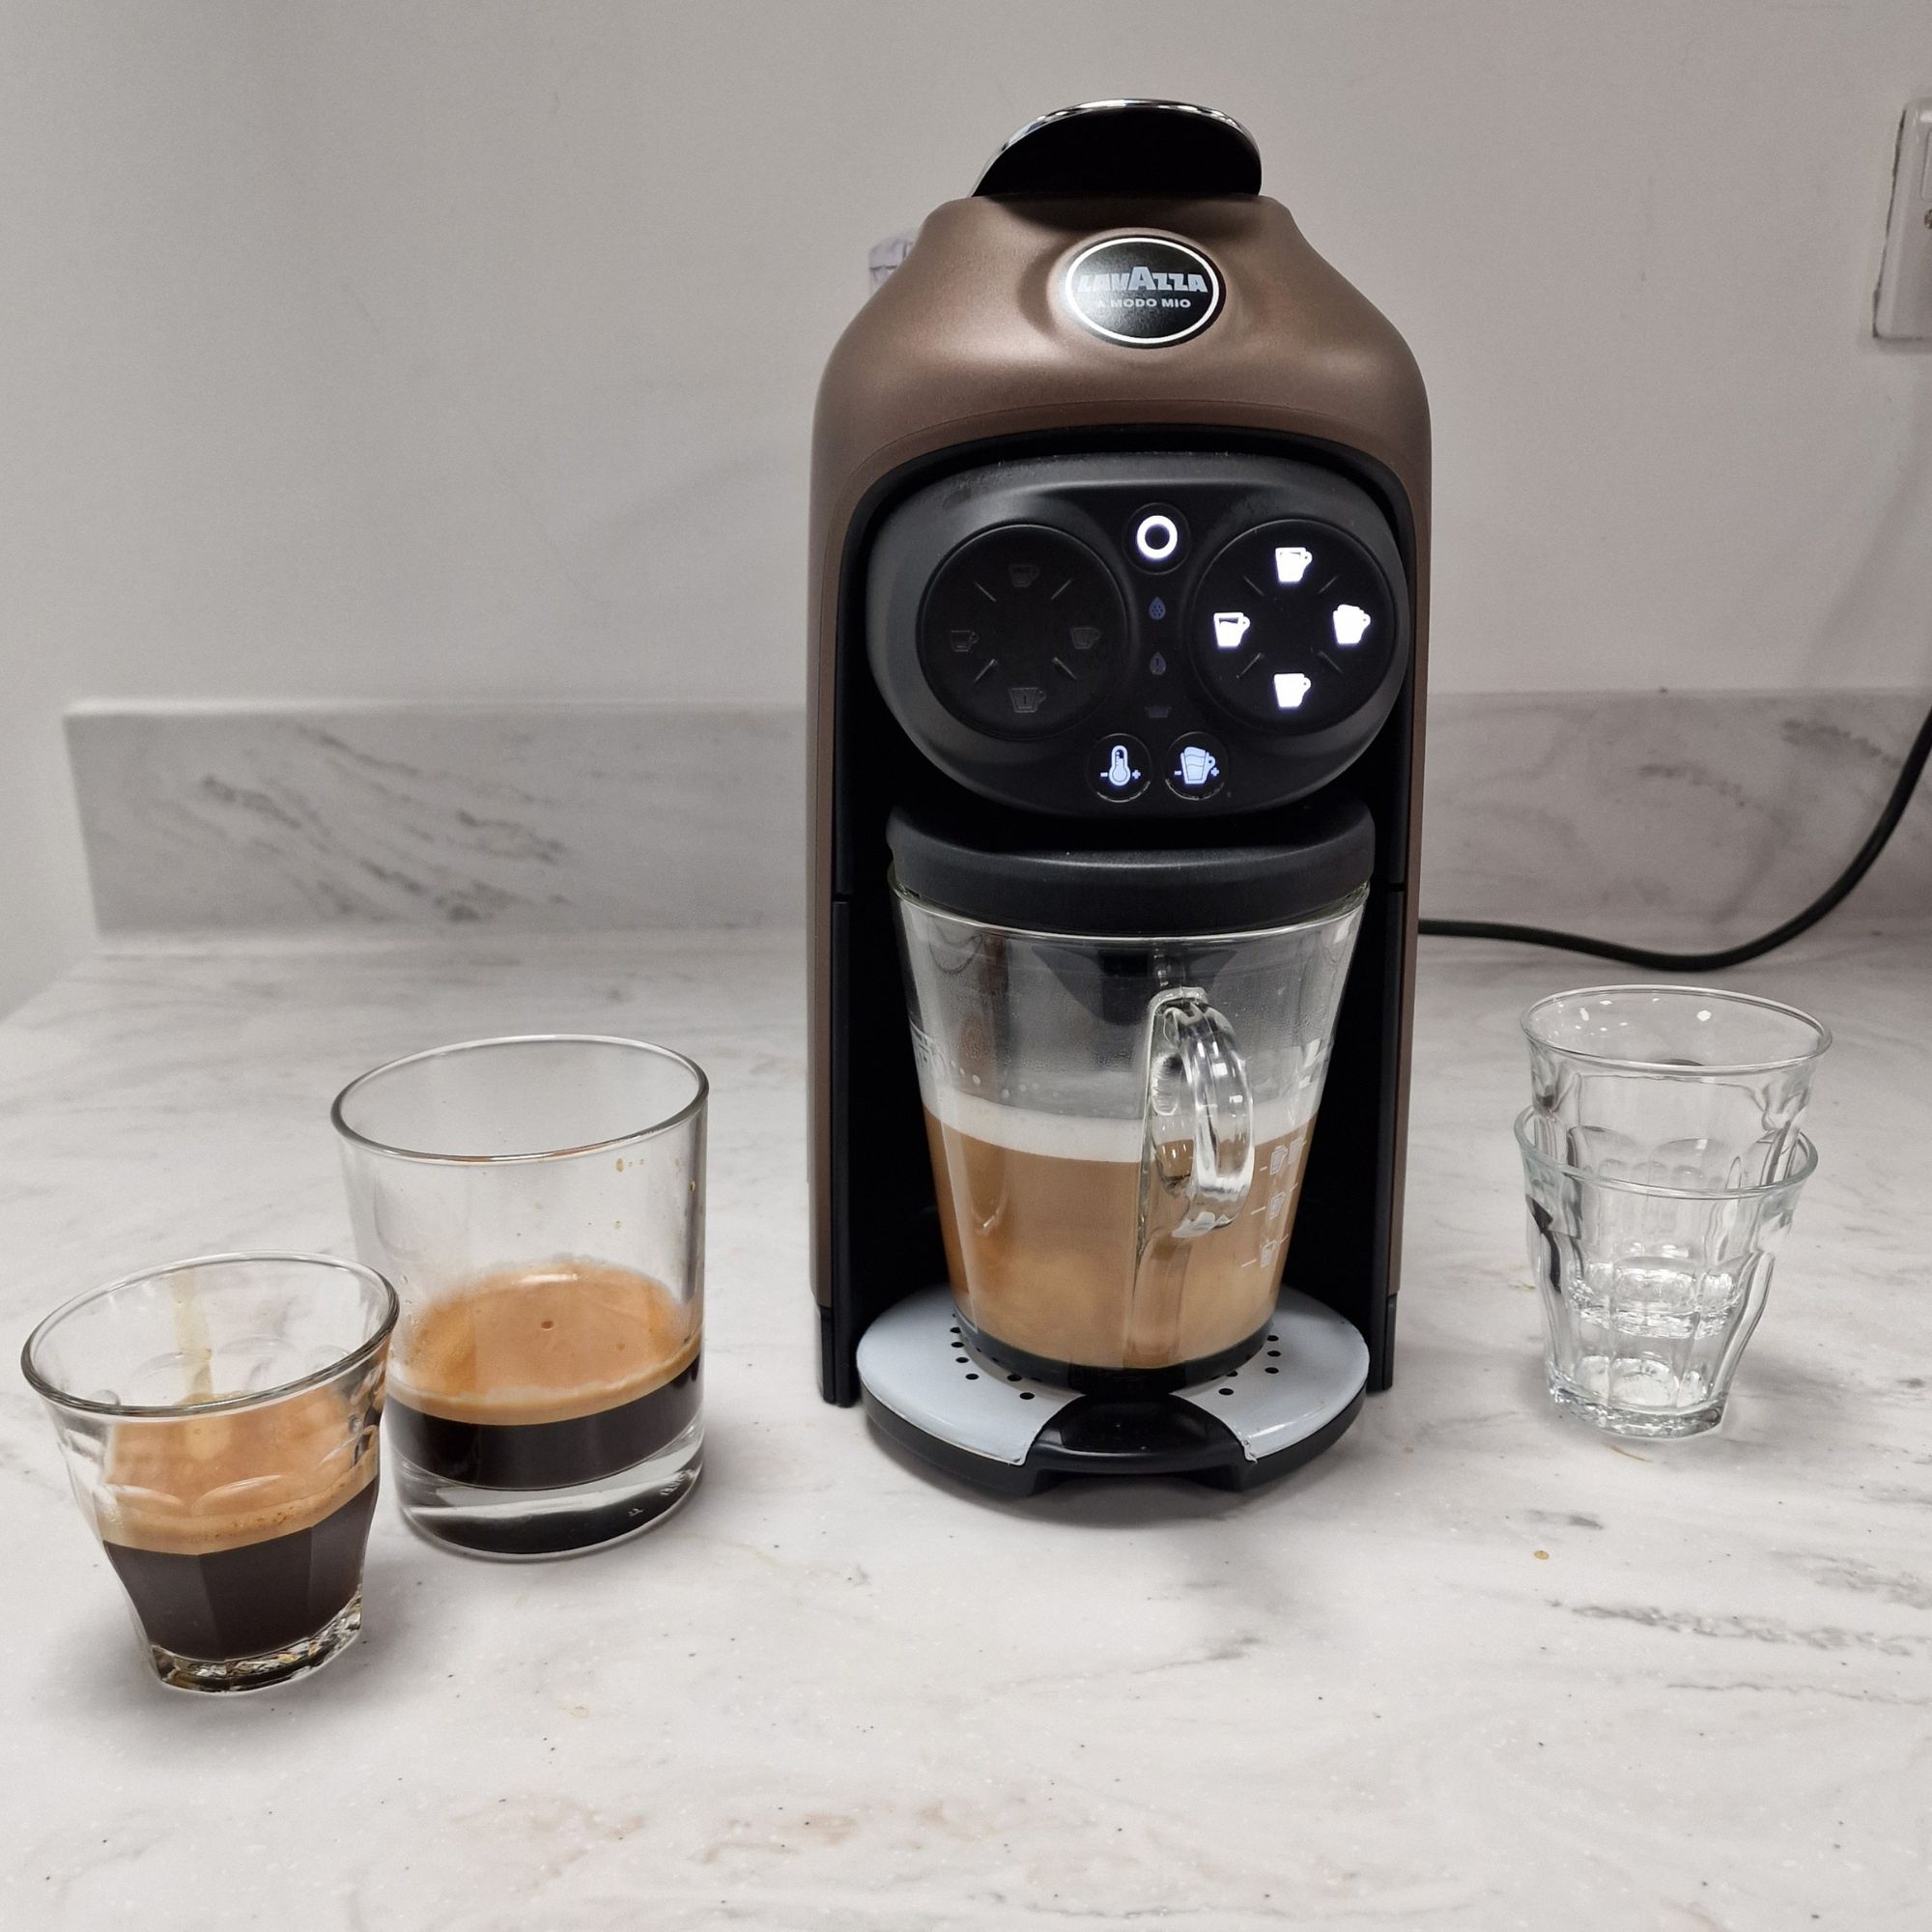 Lavazza launches first coffee machine with built in  Alexa